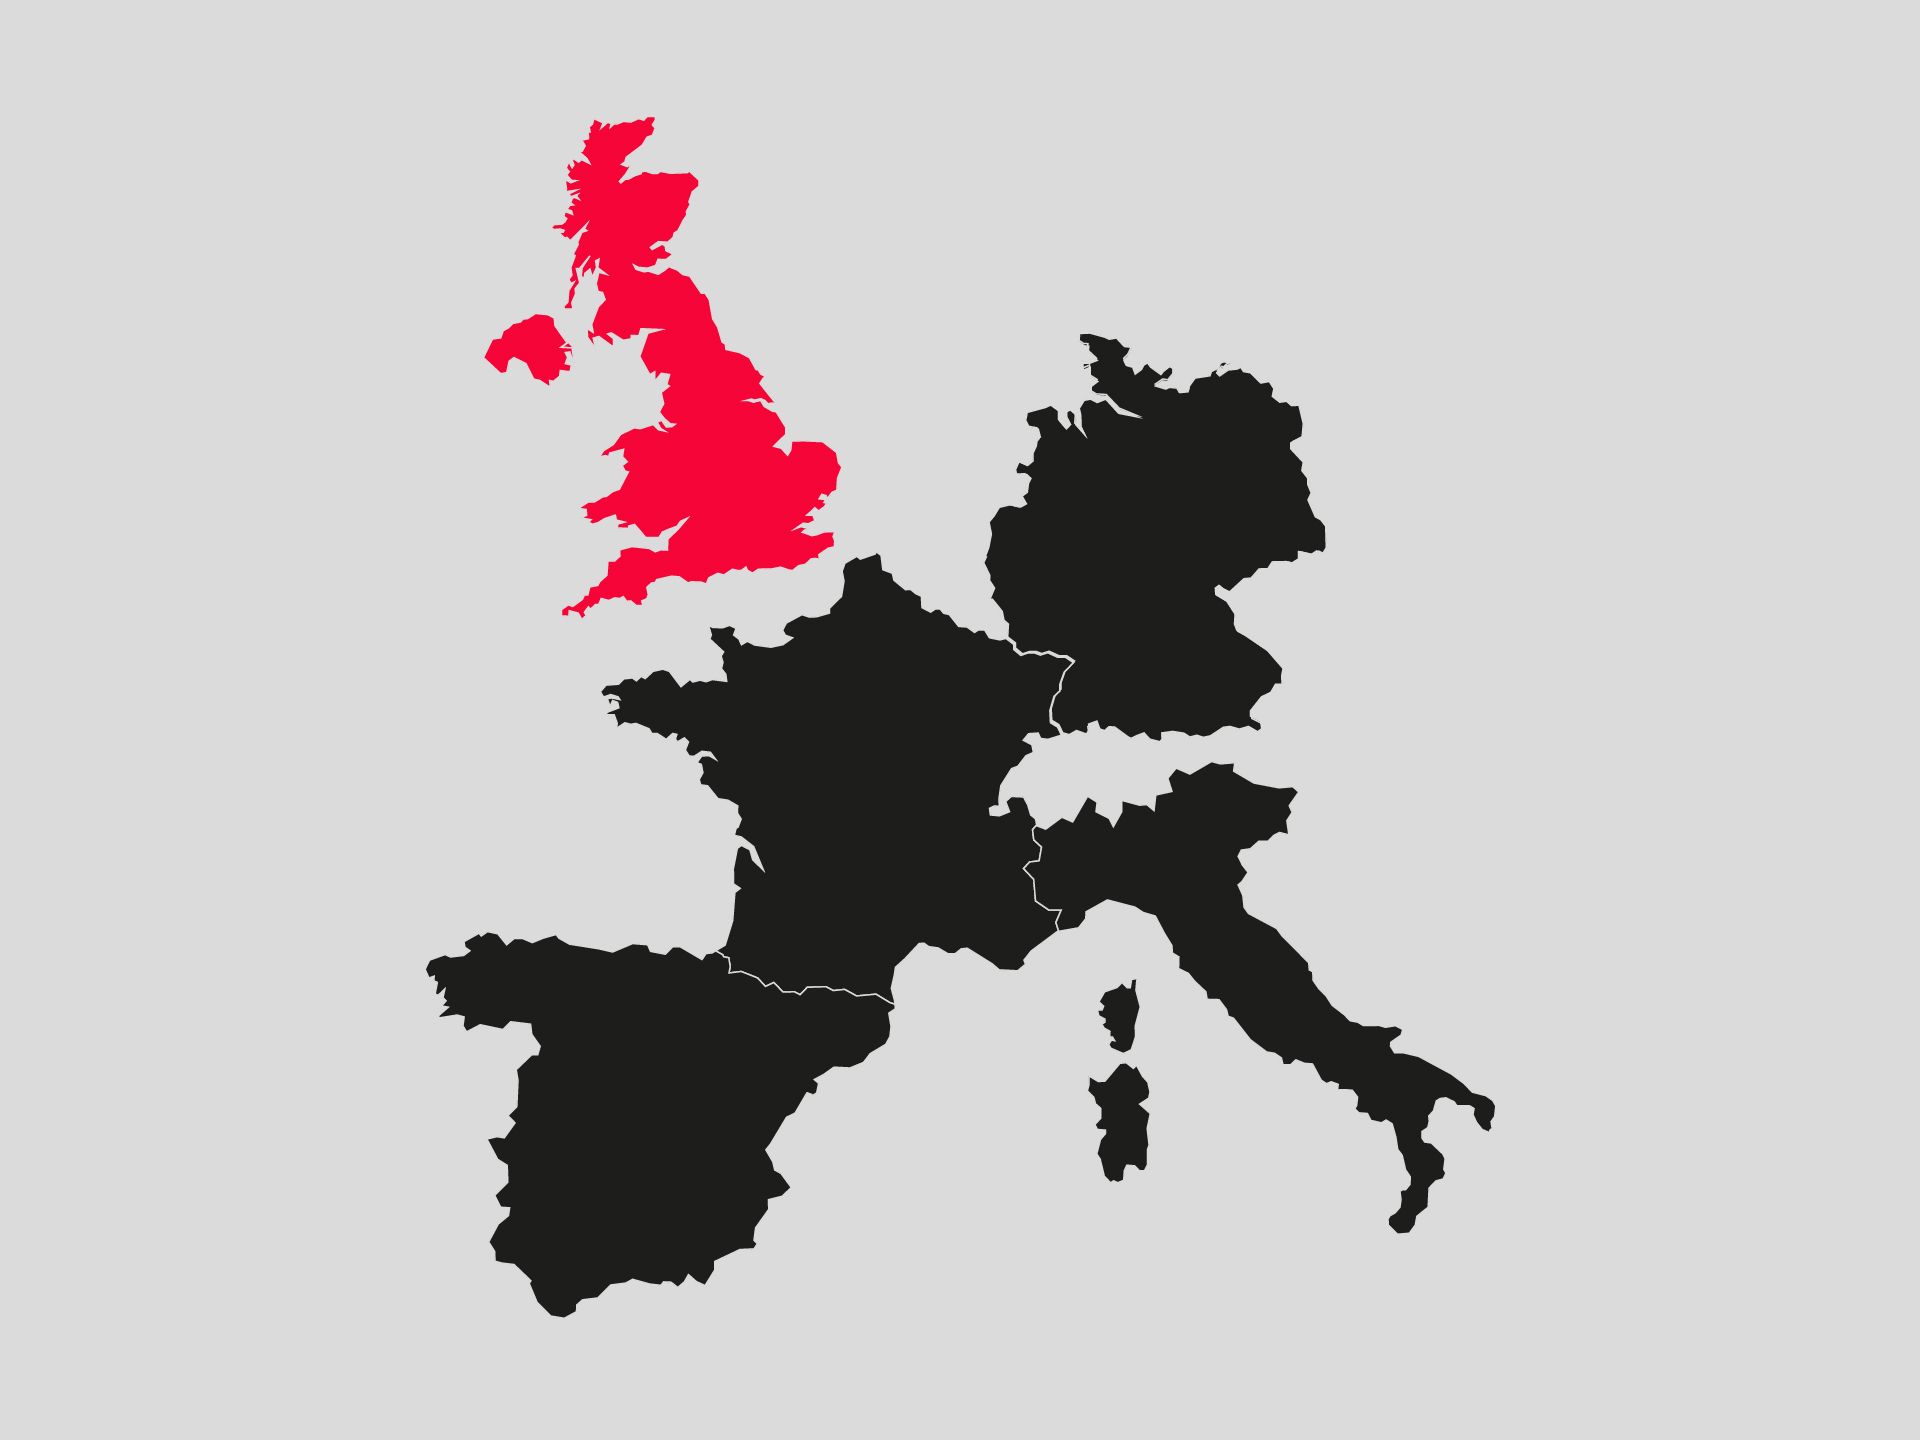 In this graphic of Europe, the UK is highlighted in color.